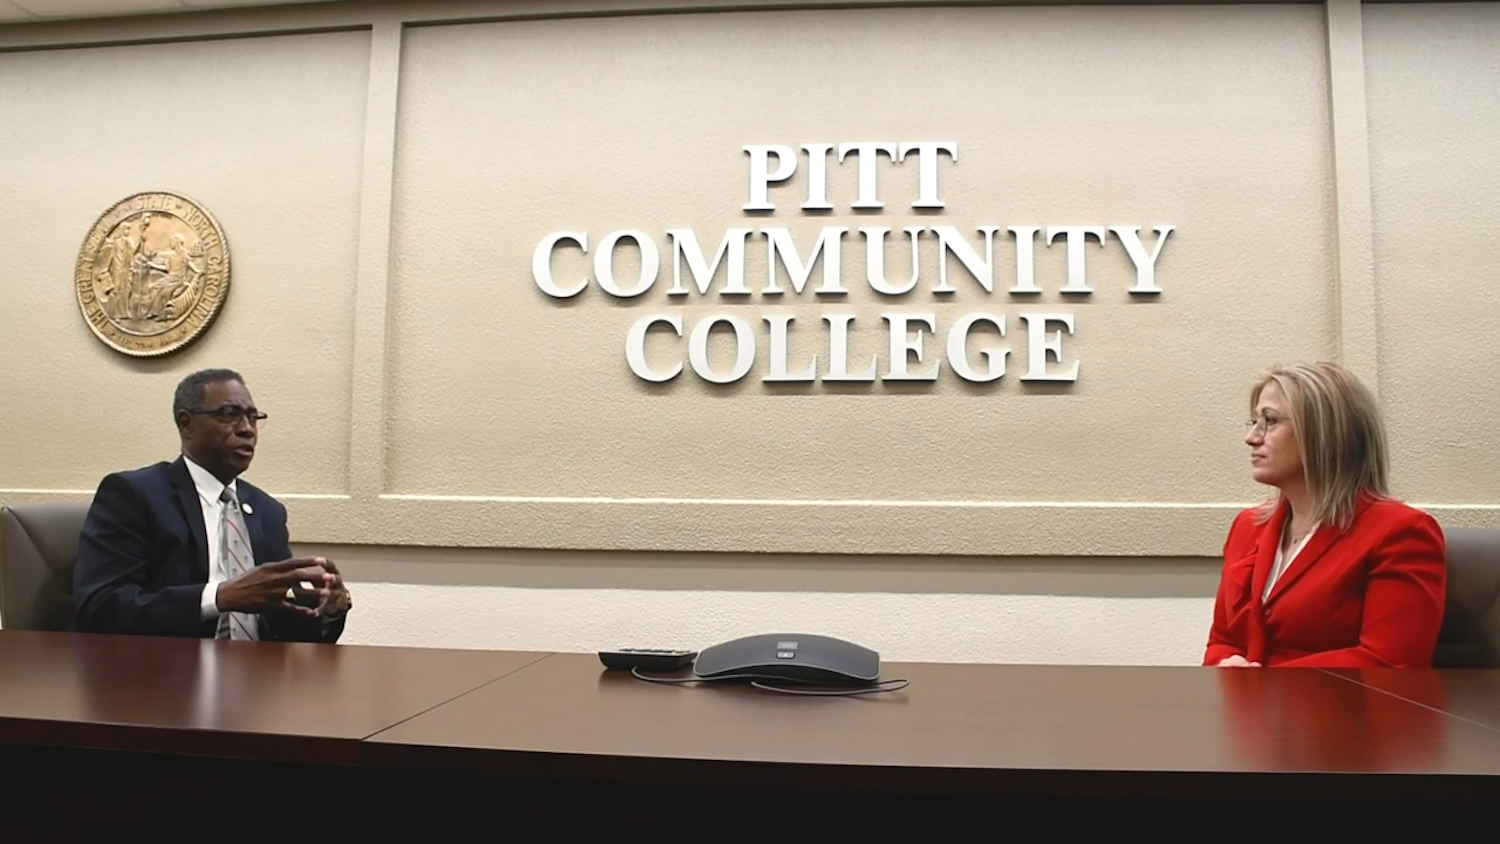 Lawrence Rouse and Monica Clark at a table in front of a Pitt Community College sign